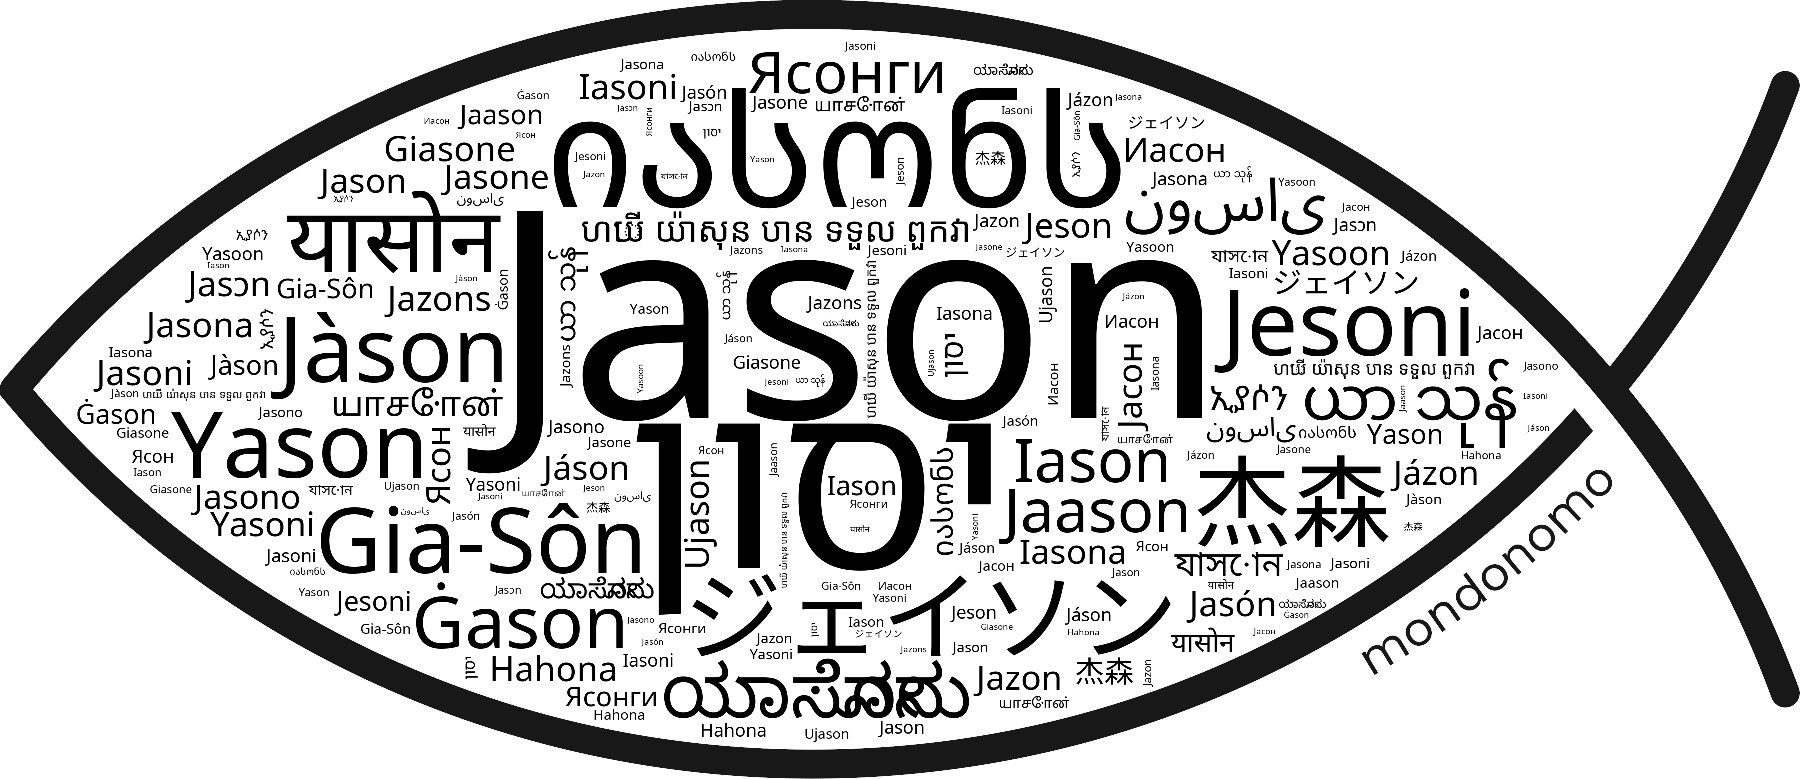 Name Jason in the world's Bibles